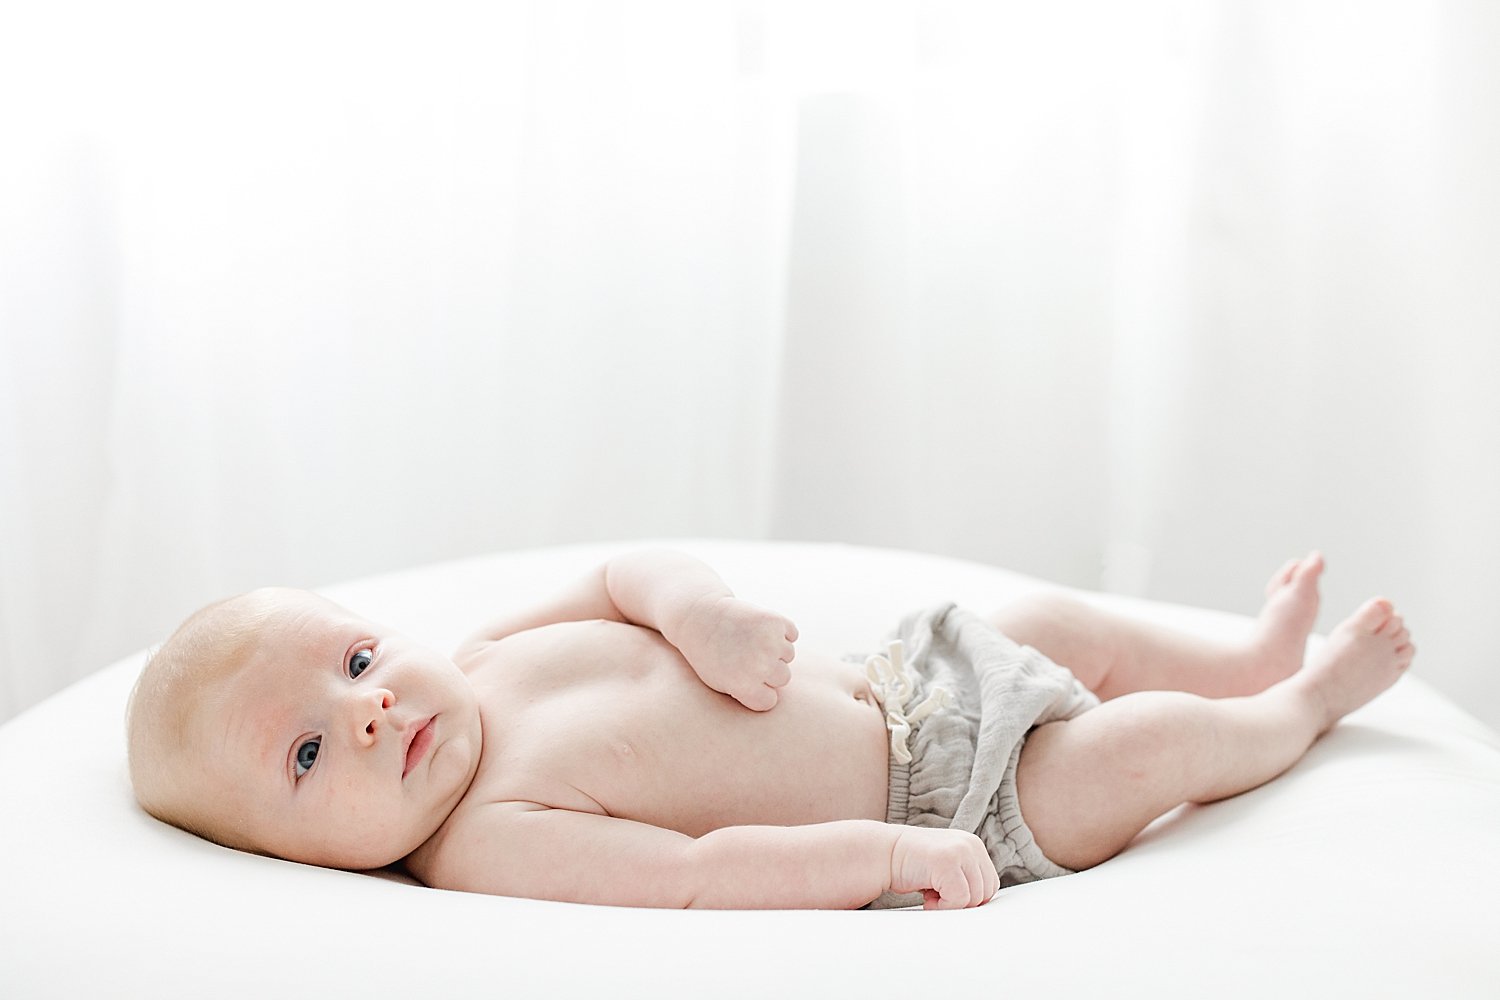 Eight week old newborn wide awake for photoshoot in studio with Kristin Wood Photography.